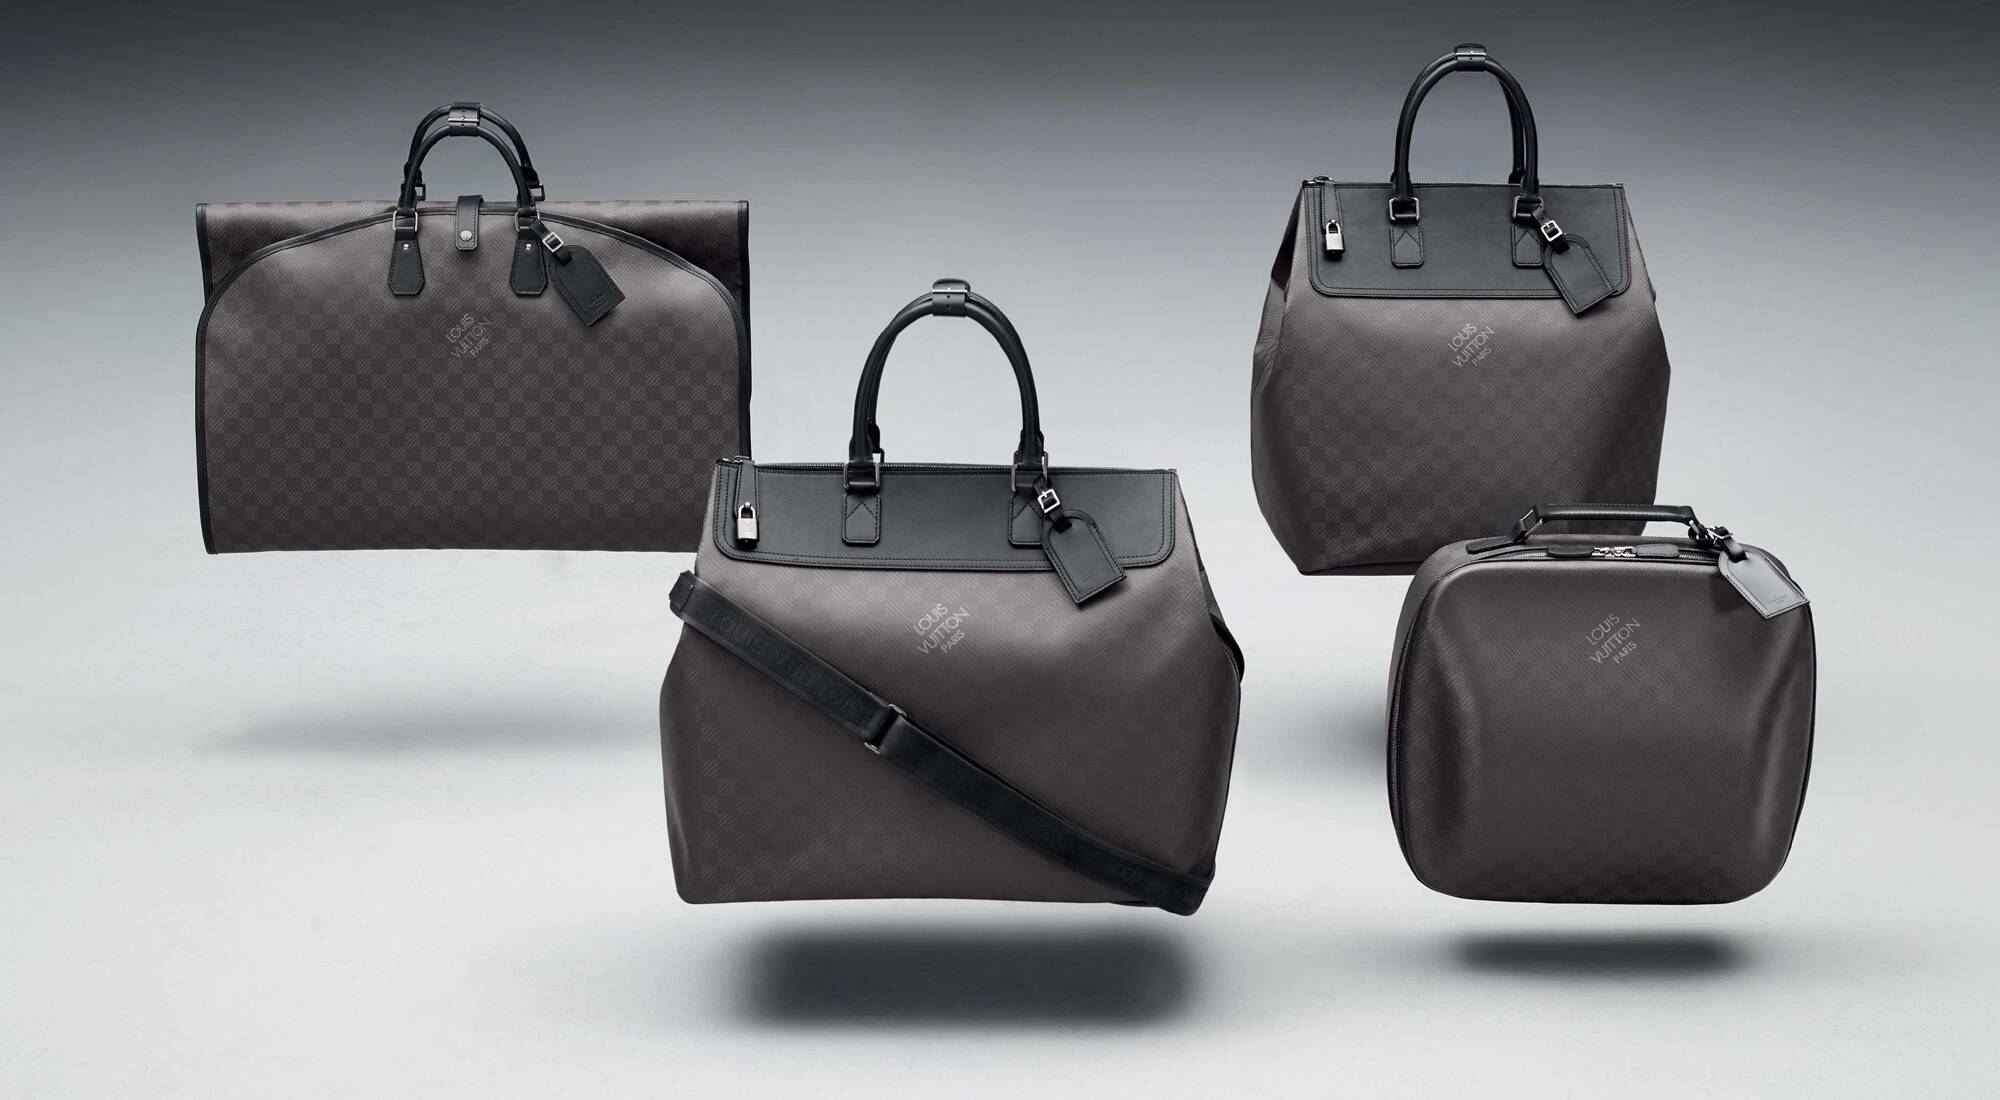 Dual Branding Campaign For Product Overview Of Bmw And Louis Vuitton